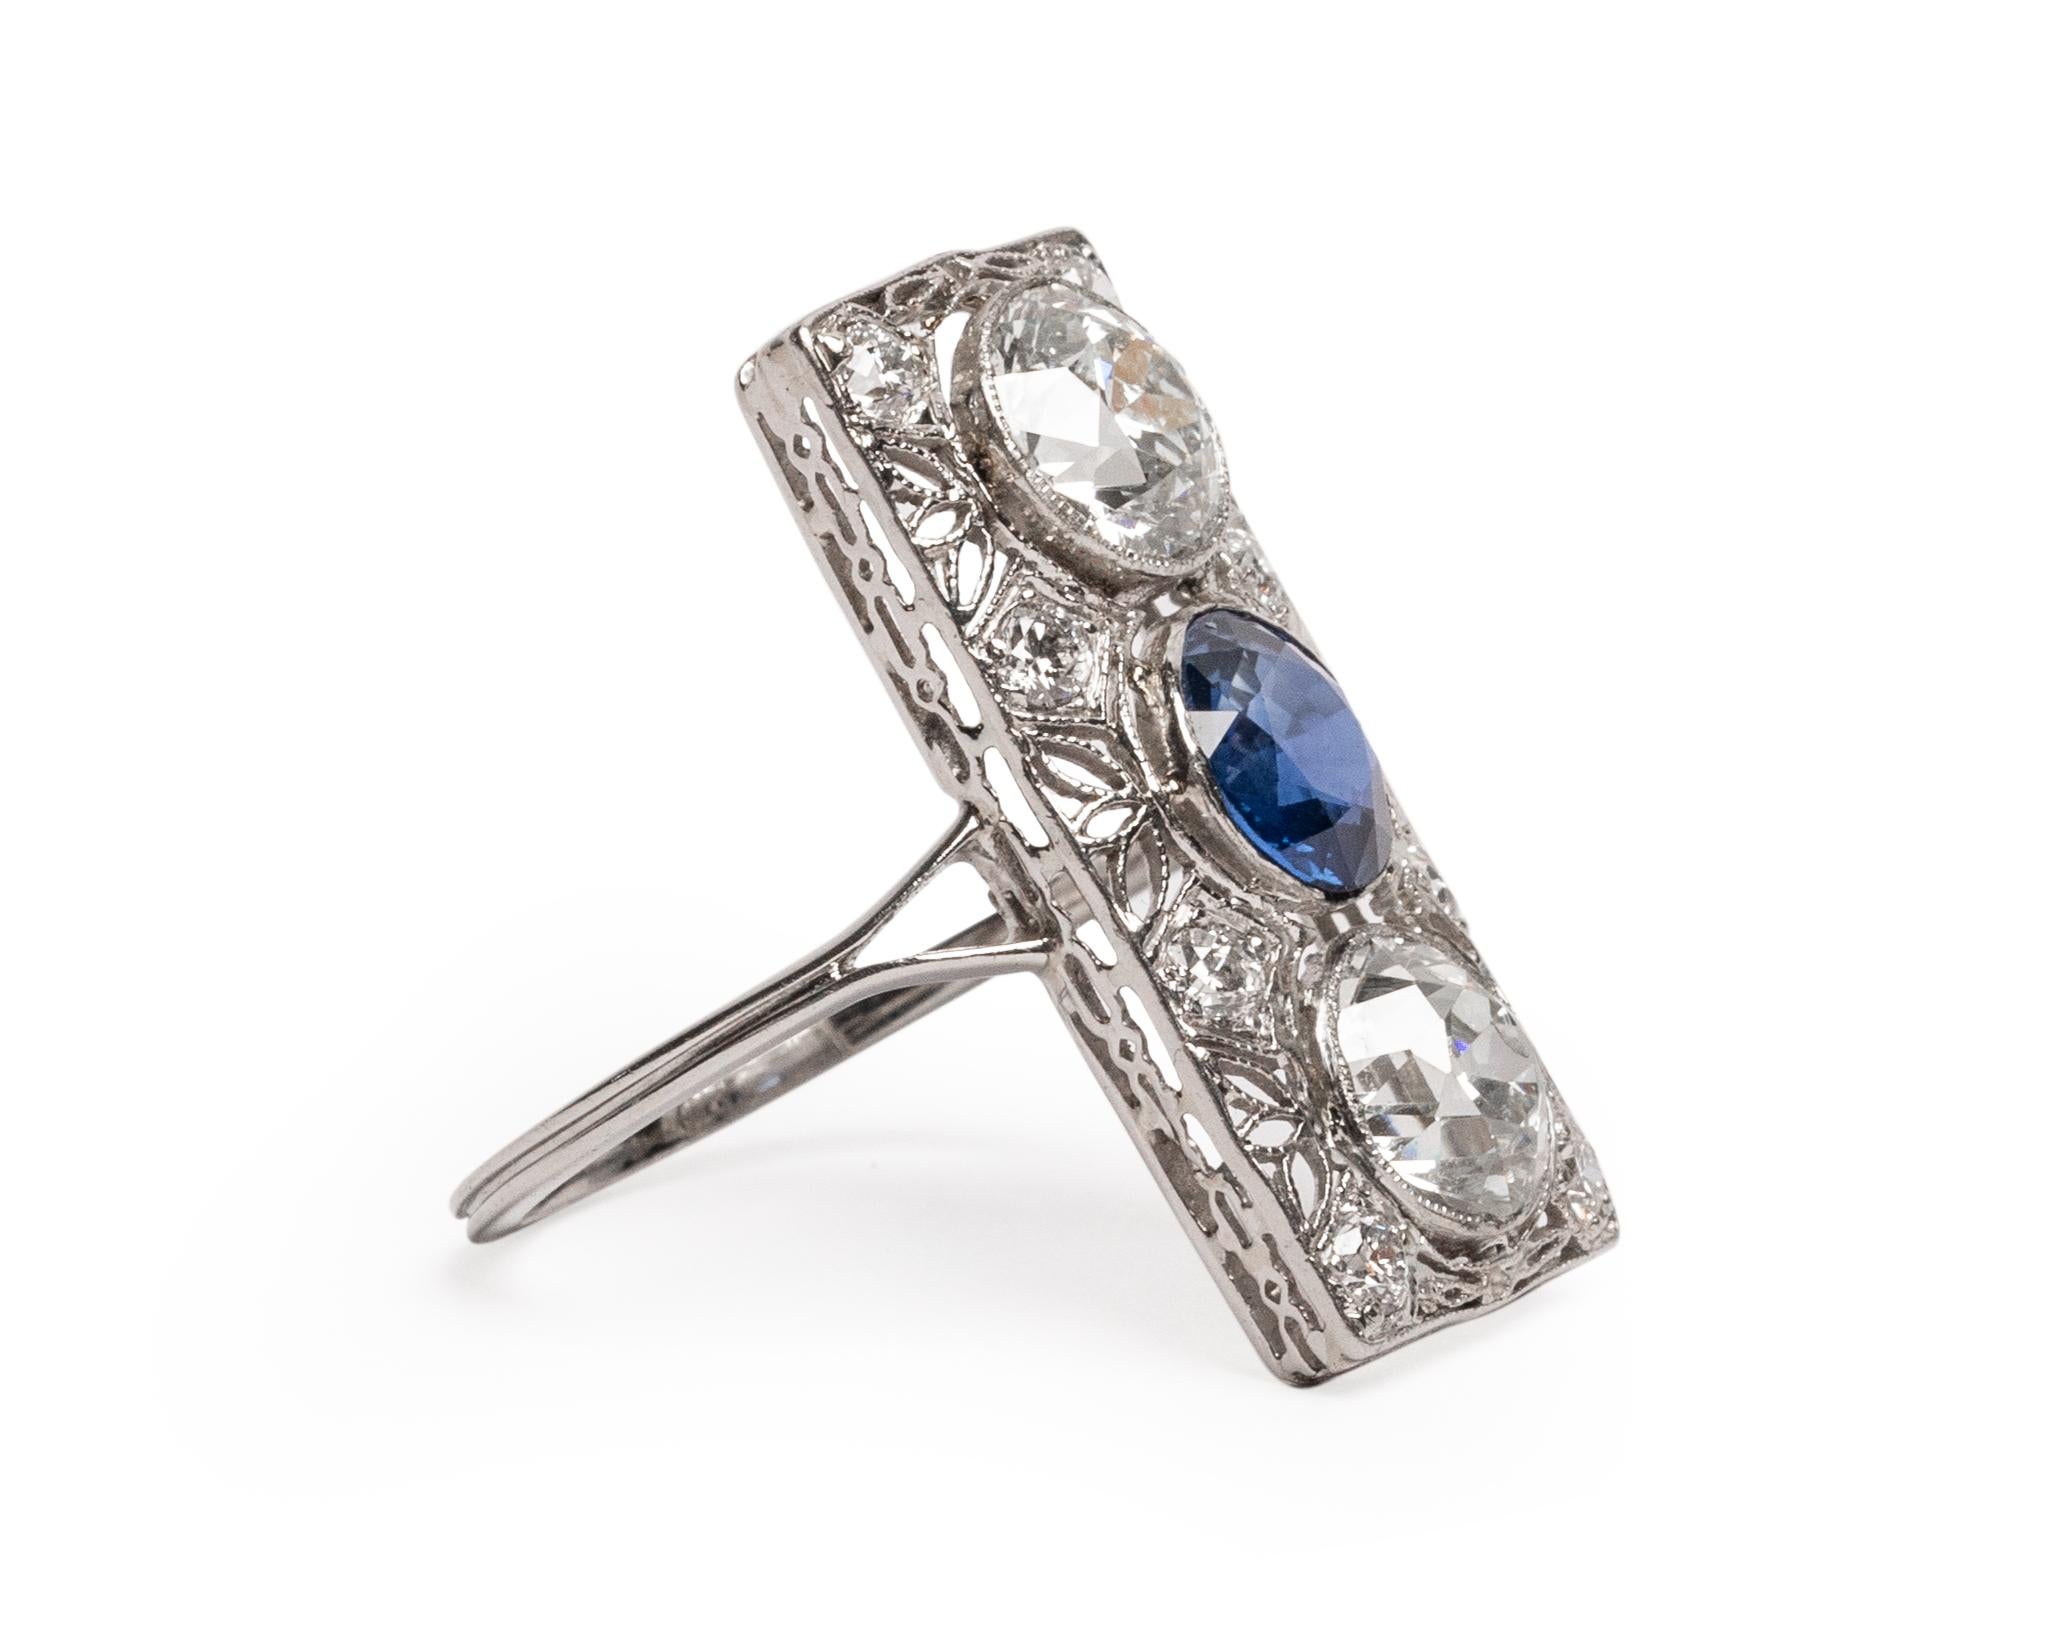 Here we have a stunning example of an Art Deco era cocktail ring! The stunning elongated rectangle is topped with two old european cut fireballs and a deep royal blue sapphire. Each of these stunning gems are bezel set and surrounded by intricate